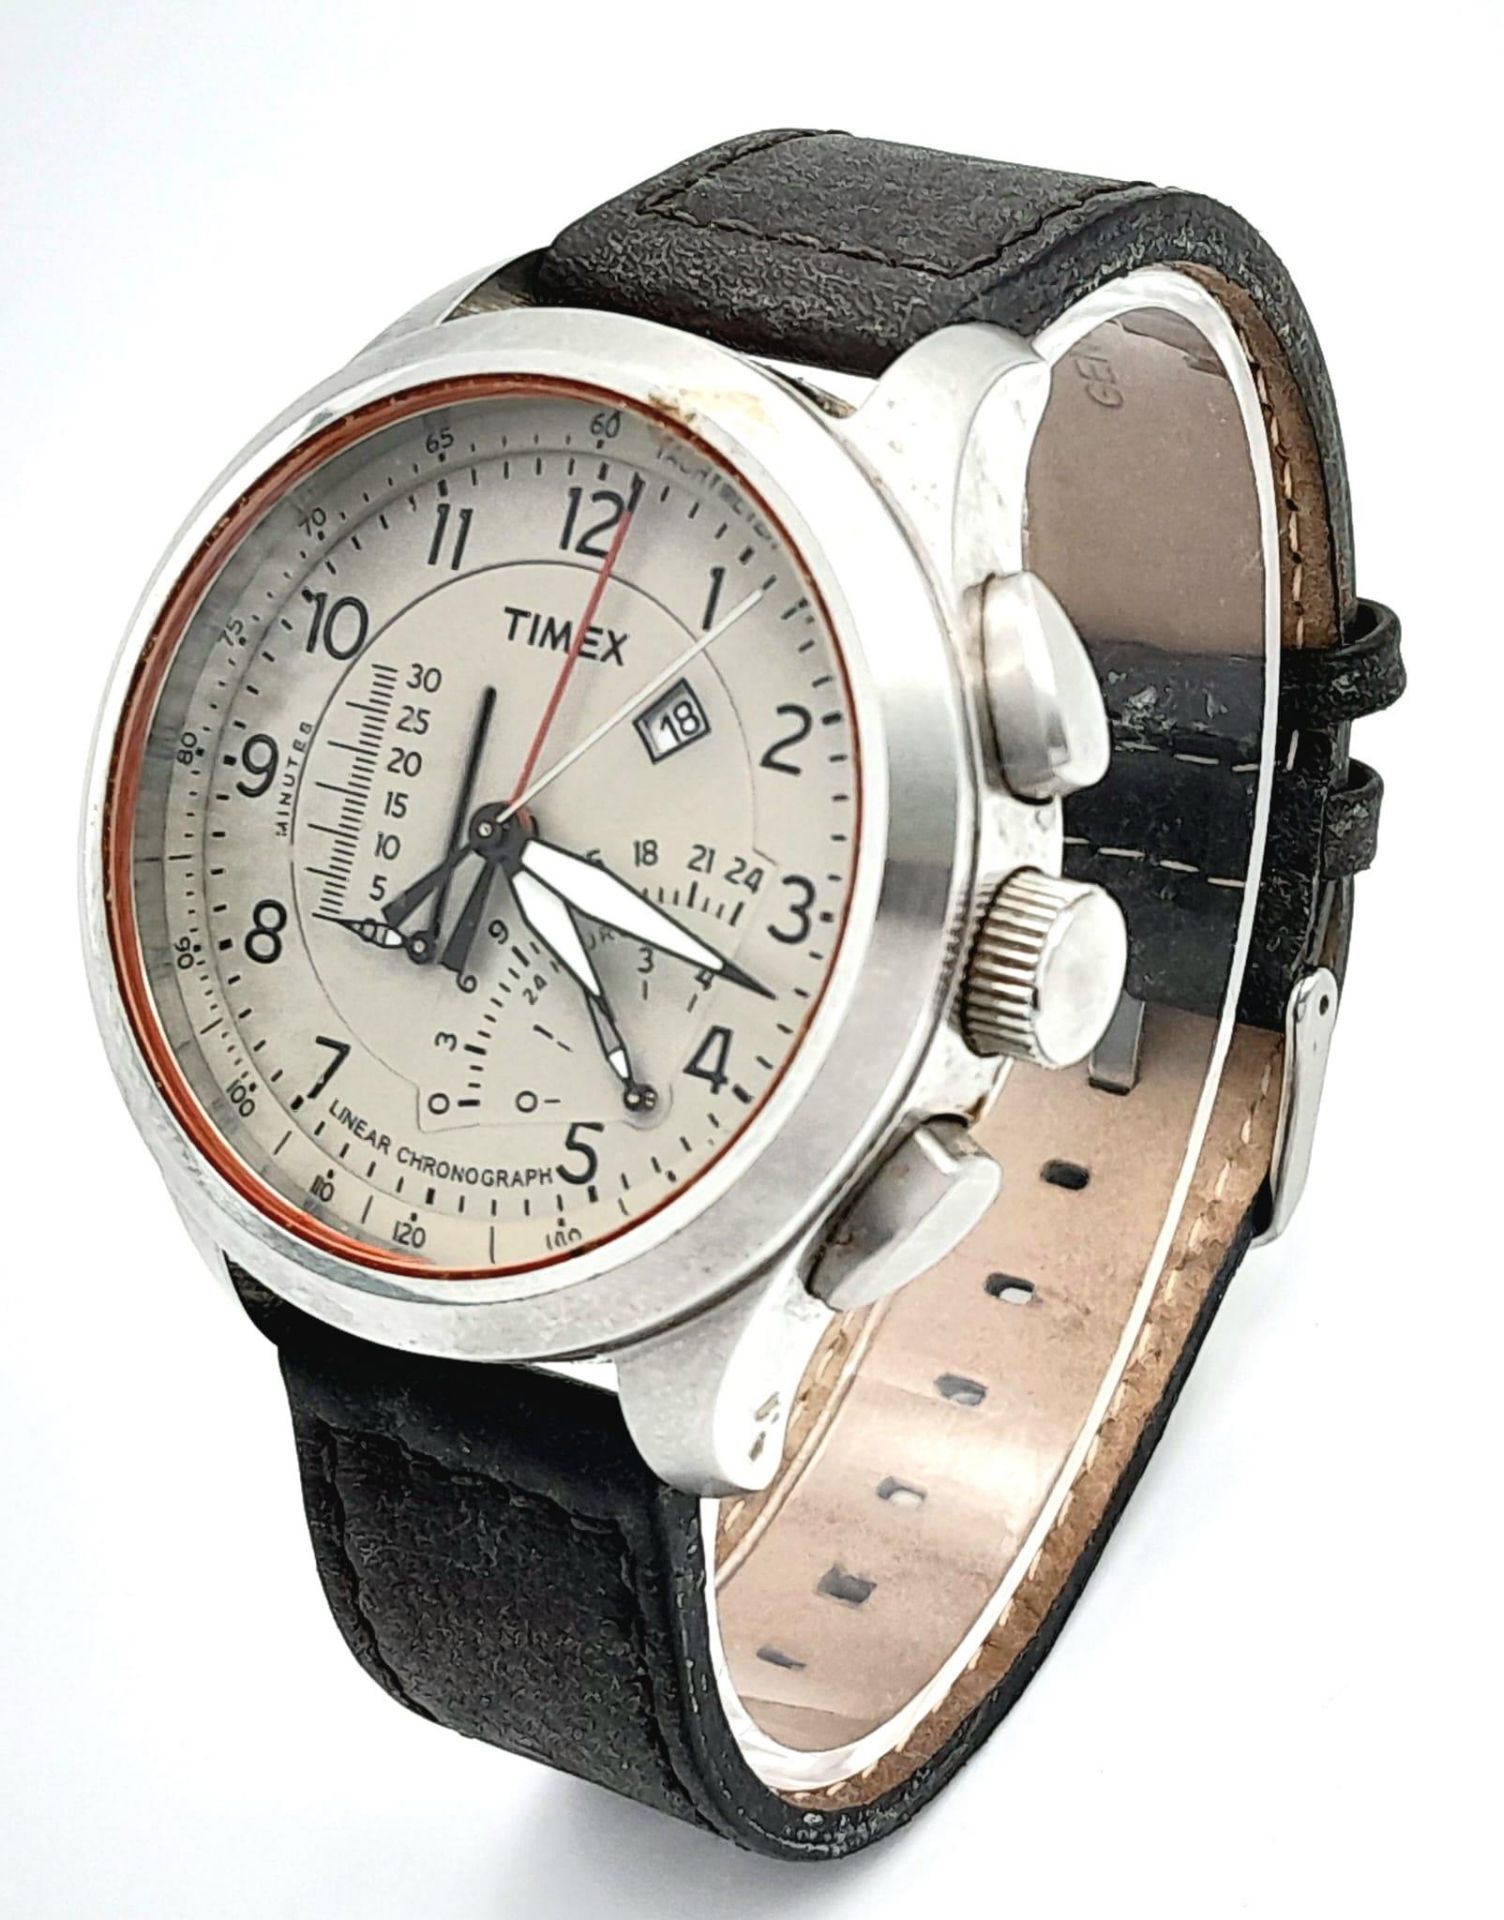 A Timex Intelligent Chronograph Quartz Gents Watch. Brown leather strap. Stainless steel case -